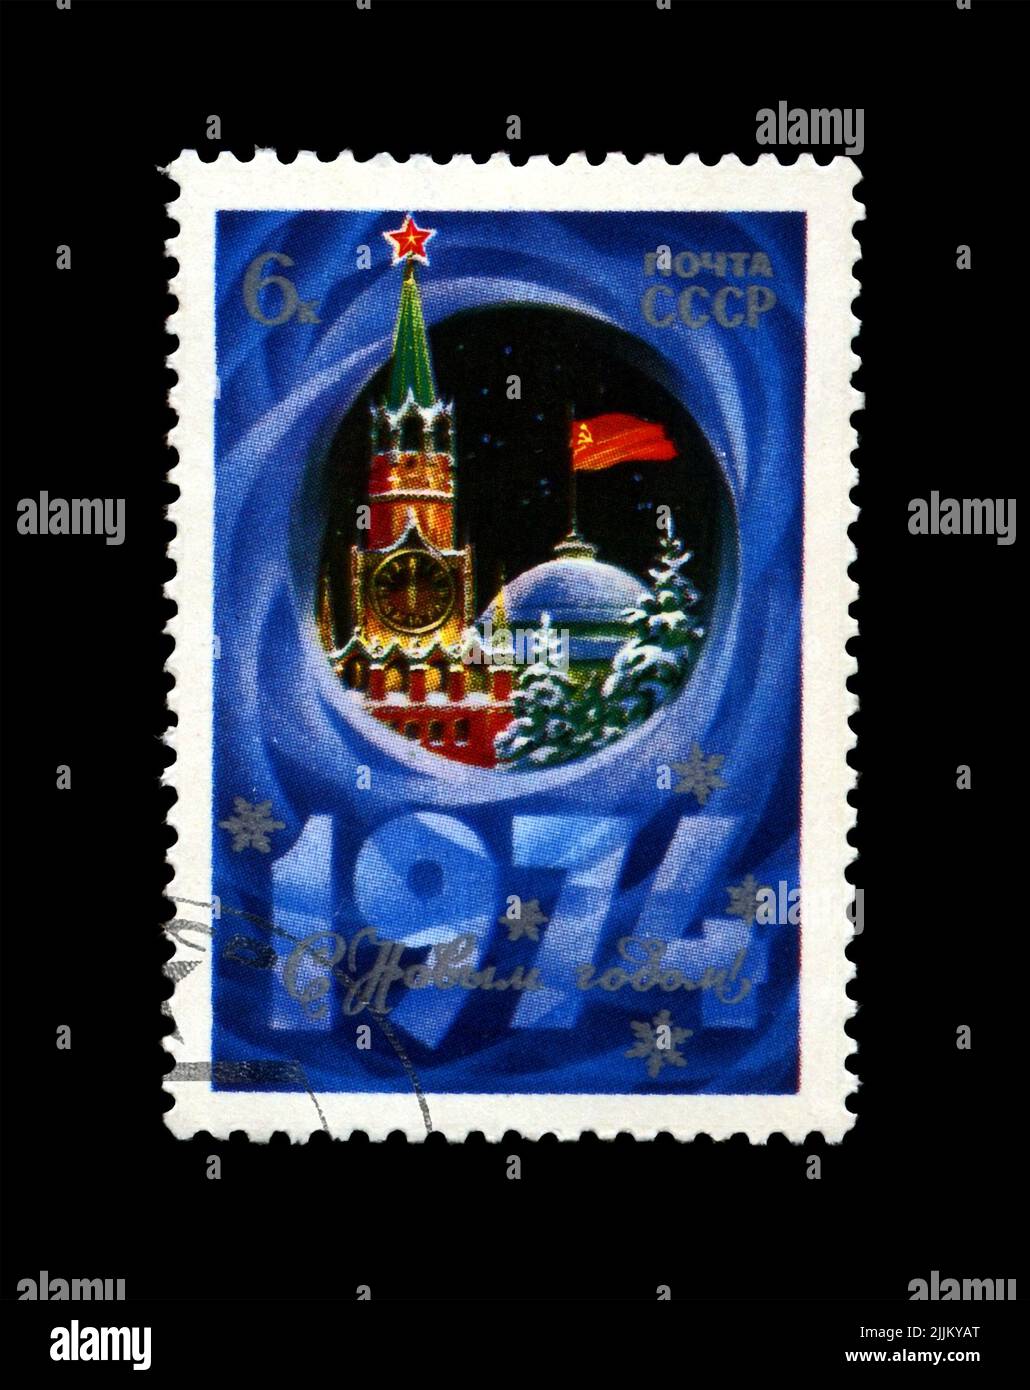 Kremlin tower with red star, red USSR flag, fir-tree, snow for New Year, USSR, circa 1973. Happy New Year 1974 as text. Stock Photo